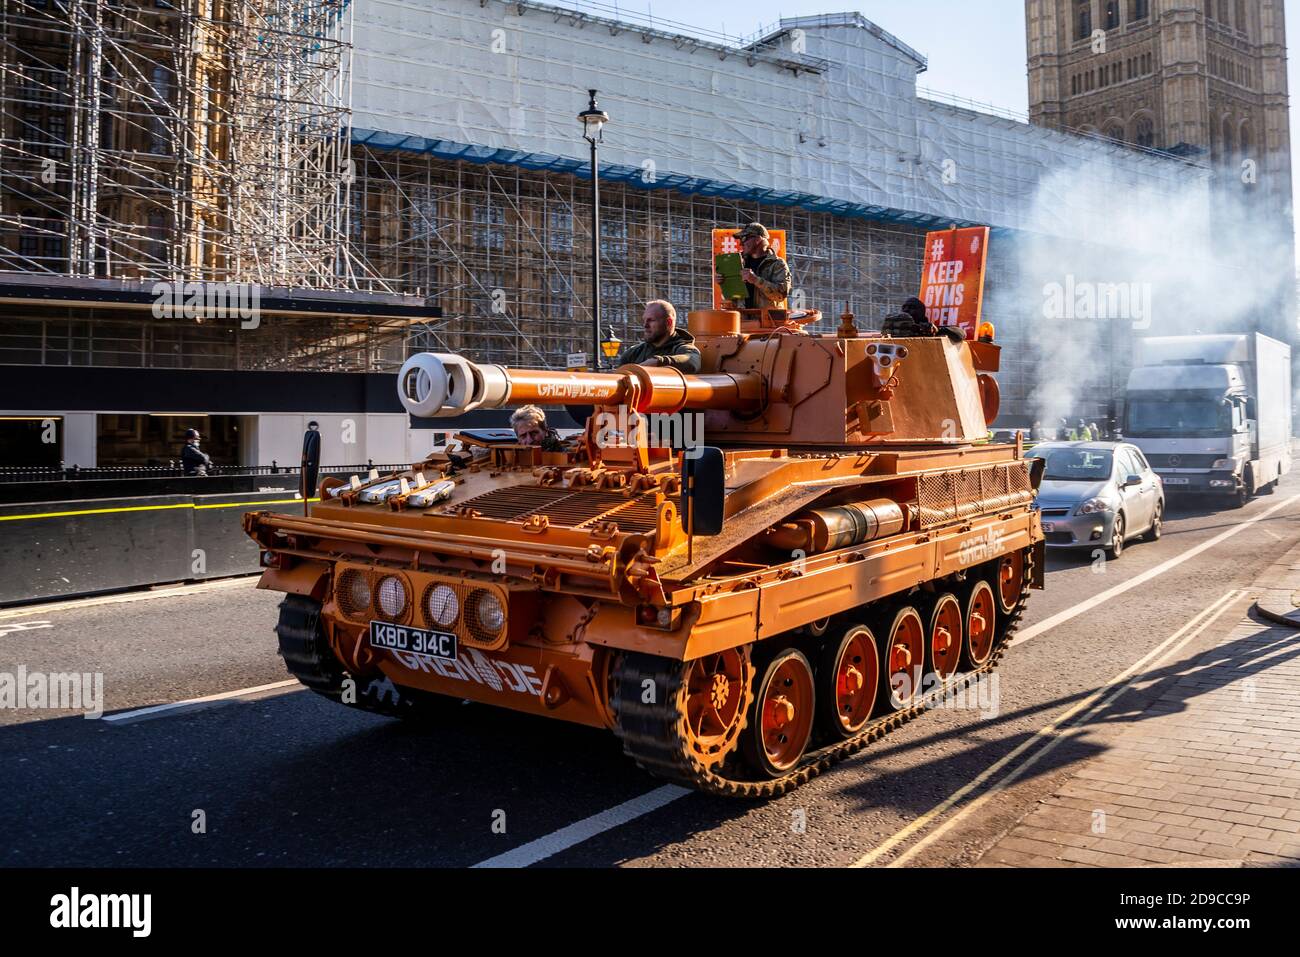 A tank, self propelled gun, driving around Westminster and Parliament in protest at the closure of gyms during the COVID-19 lockdown. Smoky exhaust Stock Photo